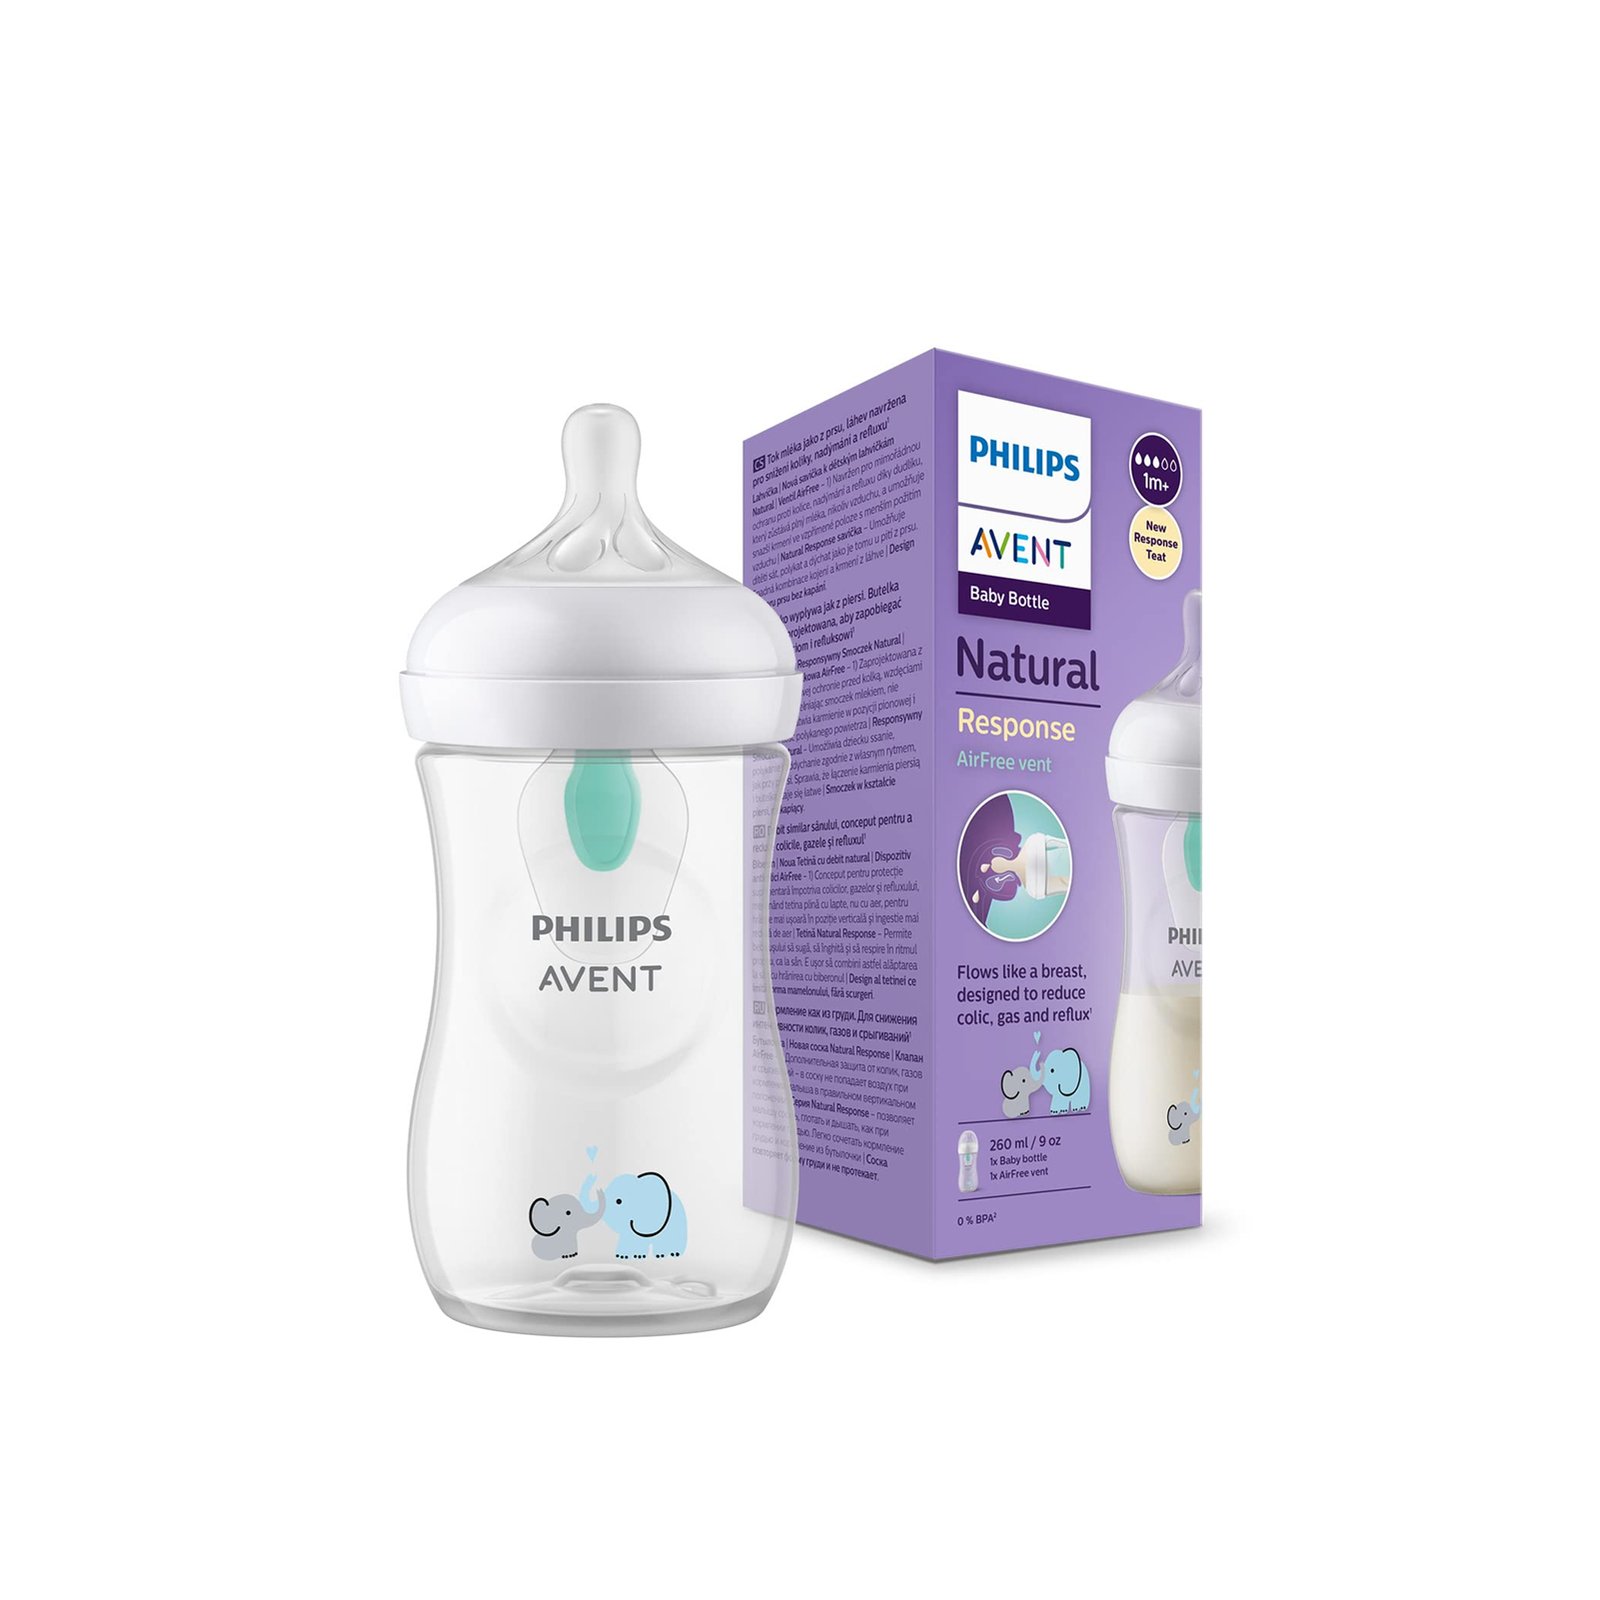 Buy Philips Avent Natural Response AirFree Vent Baby Bottle 1m+